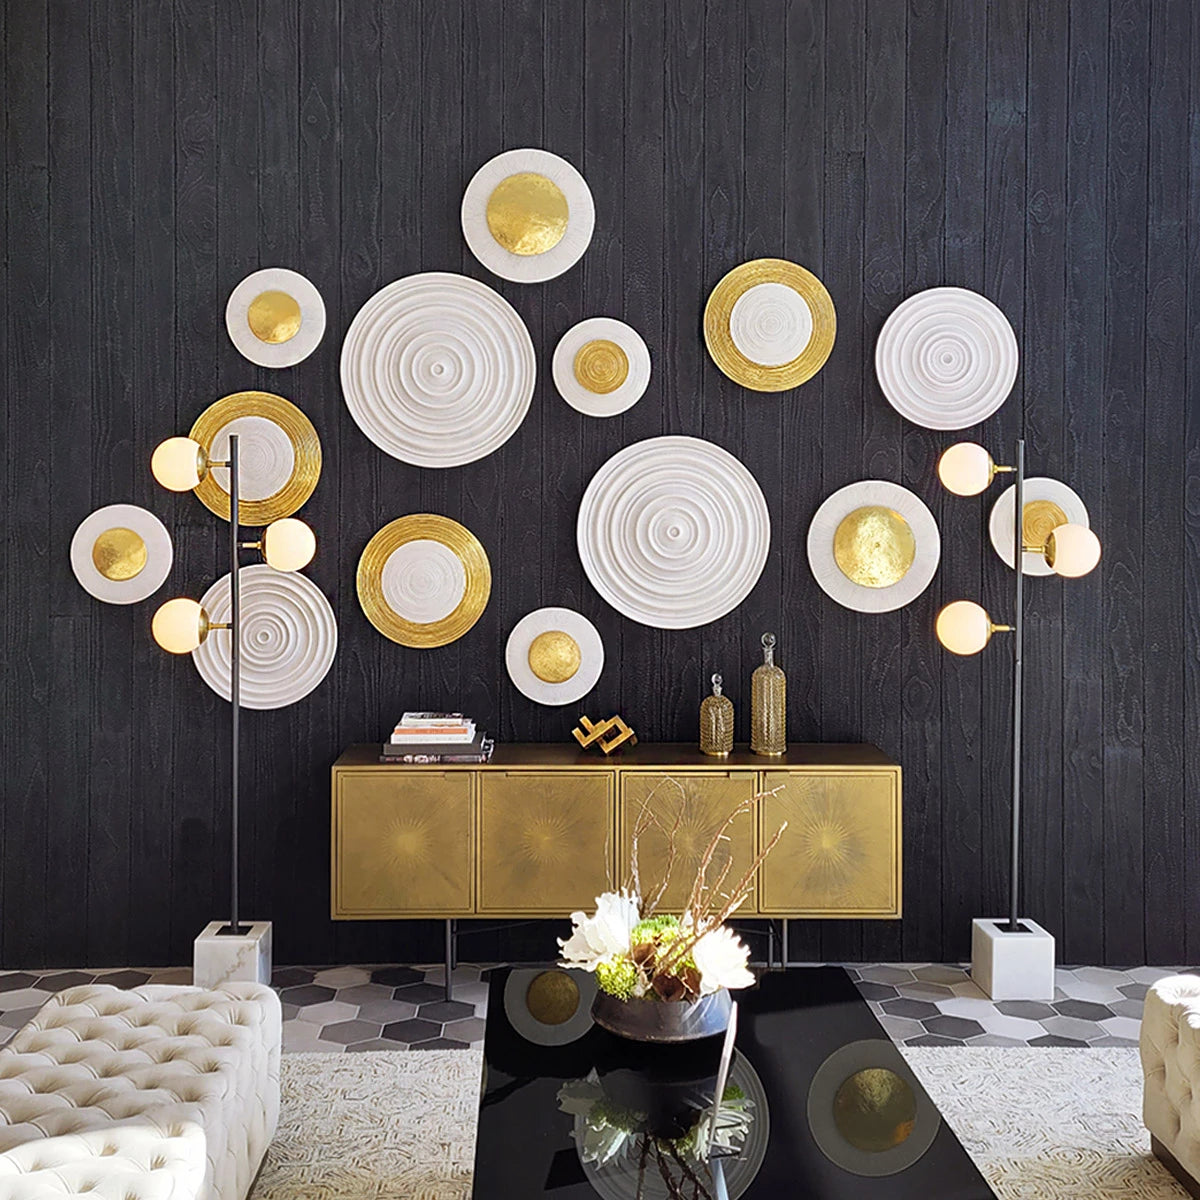 A variety of round gold and white wall art pieces on a black wall in a lobby setting.